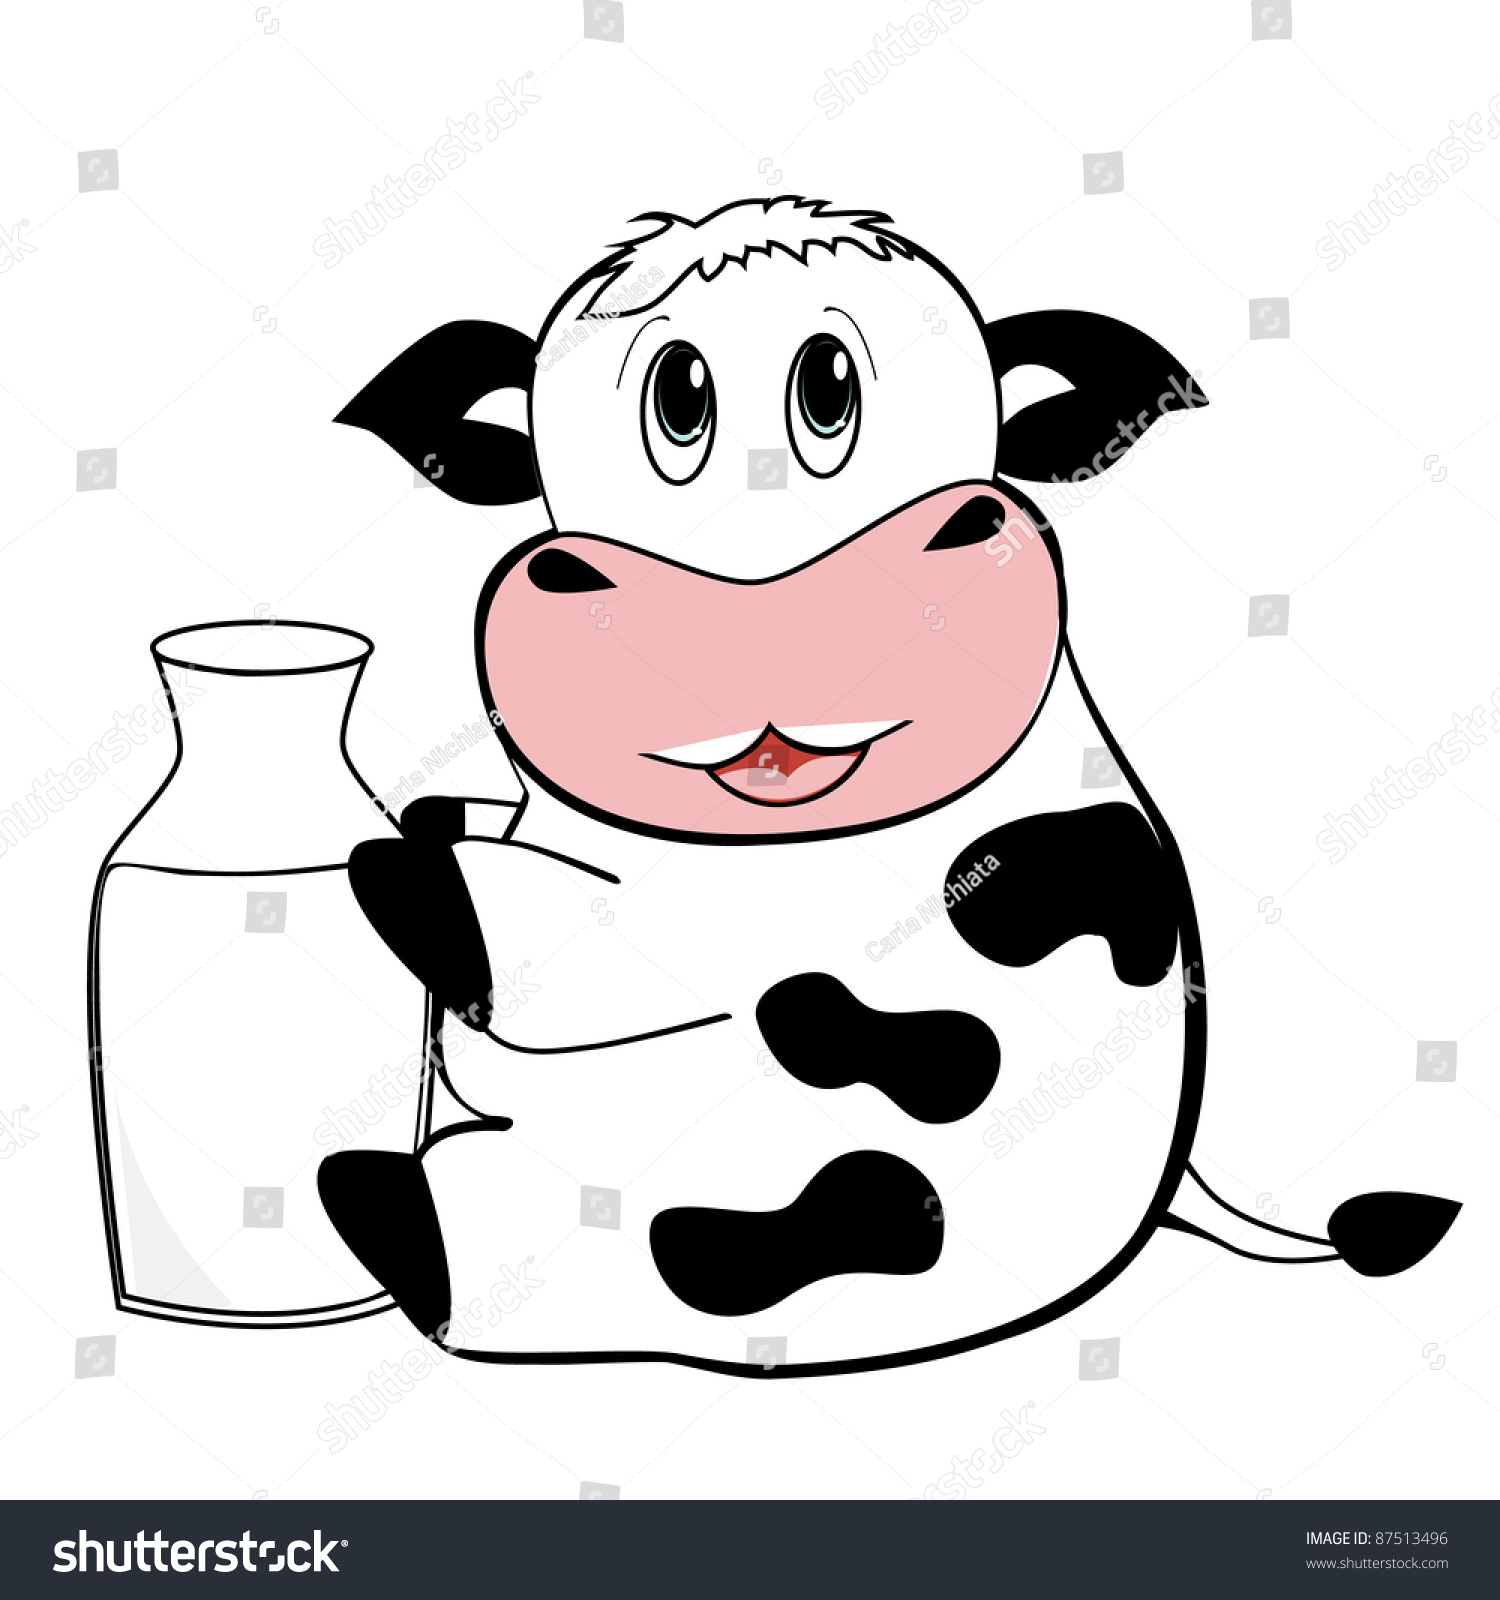 cow tail clipart - photo #15